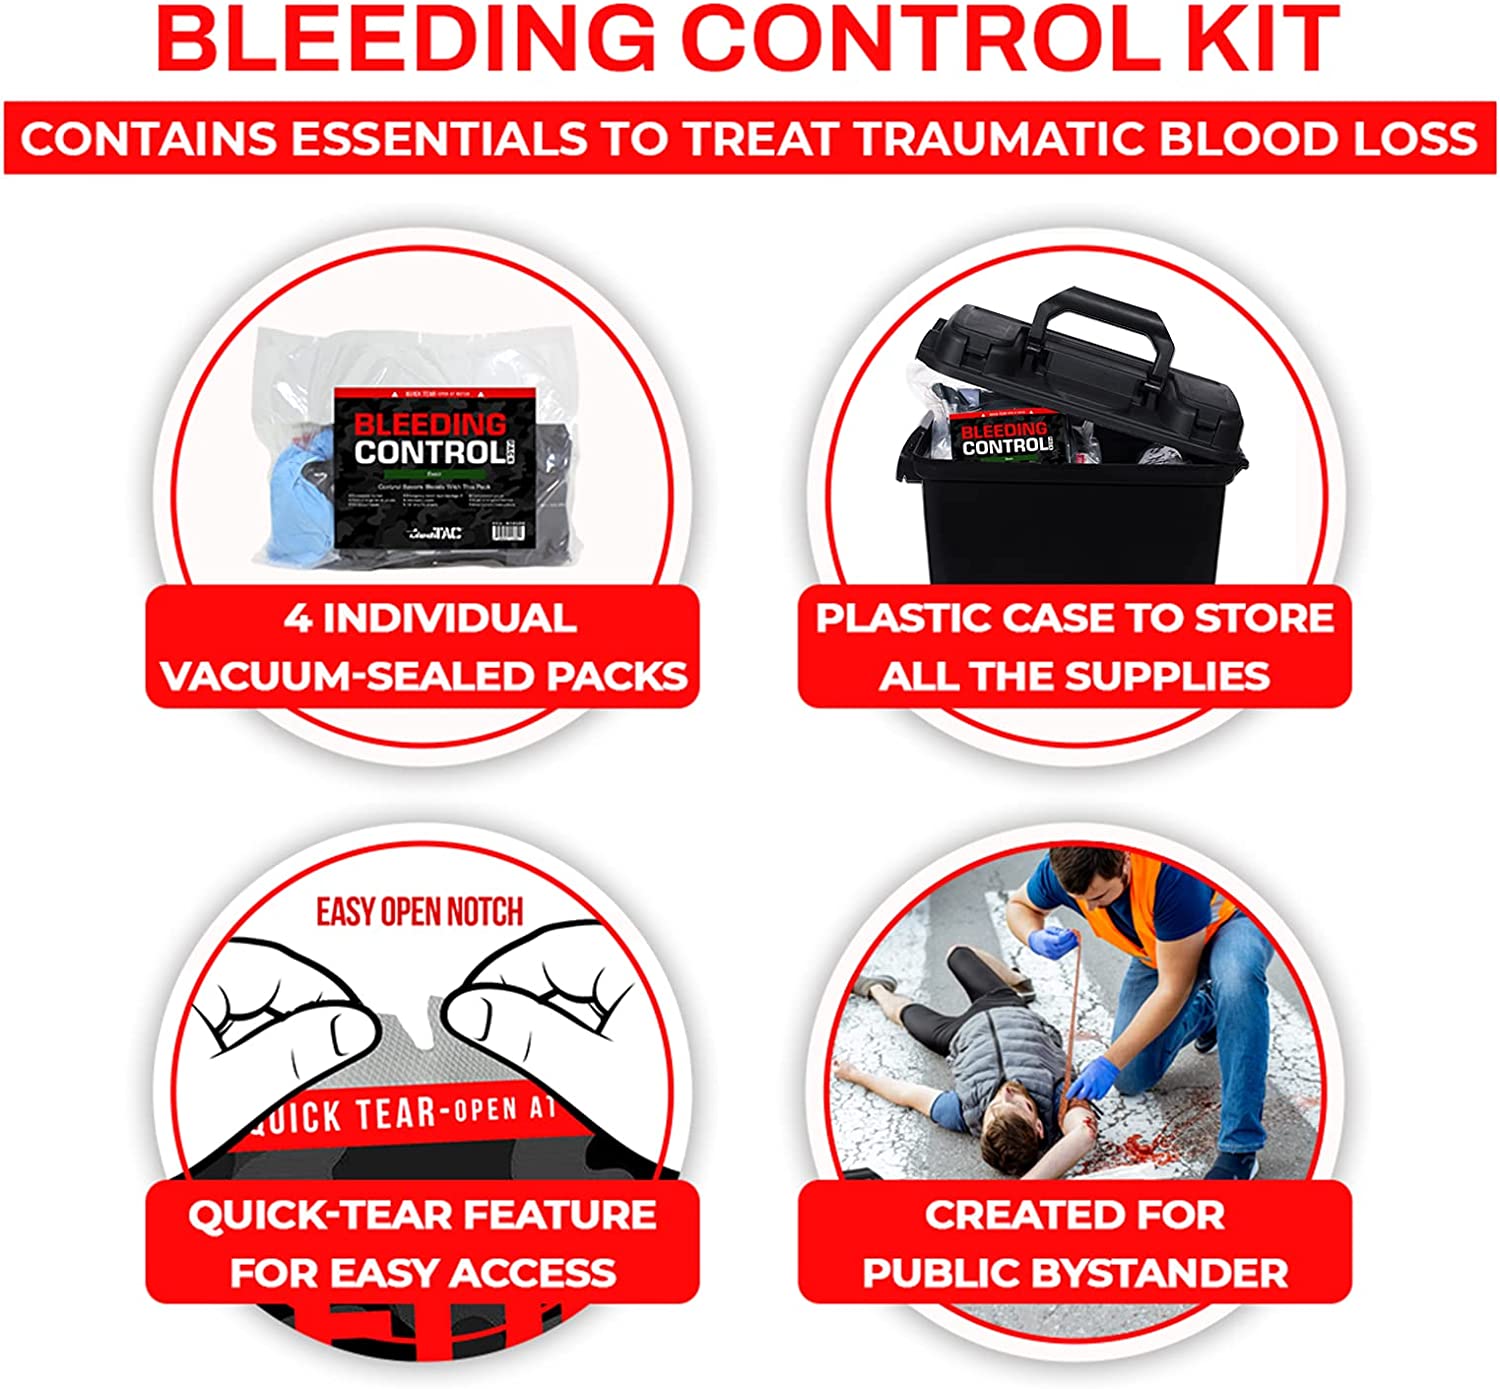 MediTac Bleeding Control Kit in Plastic Case, 4 Individual Vacuum-Sealed Kits for Bystanders and First Responders to Control Severe Bleeding